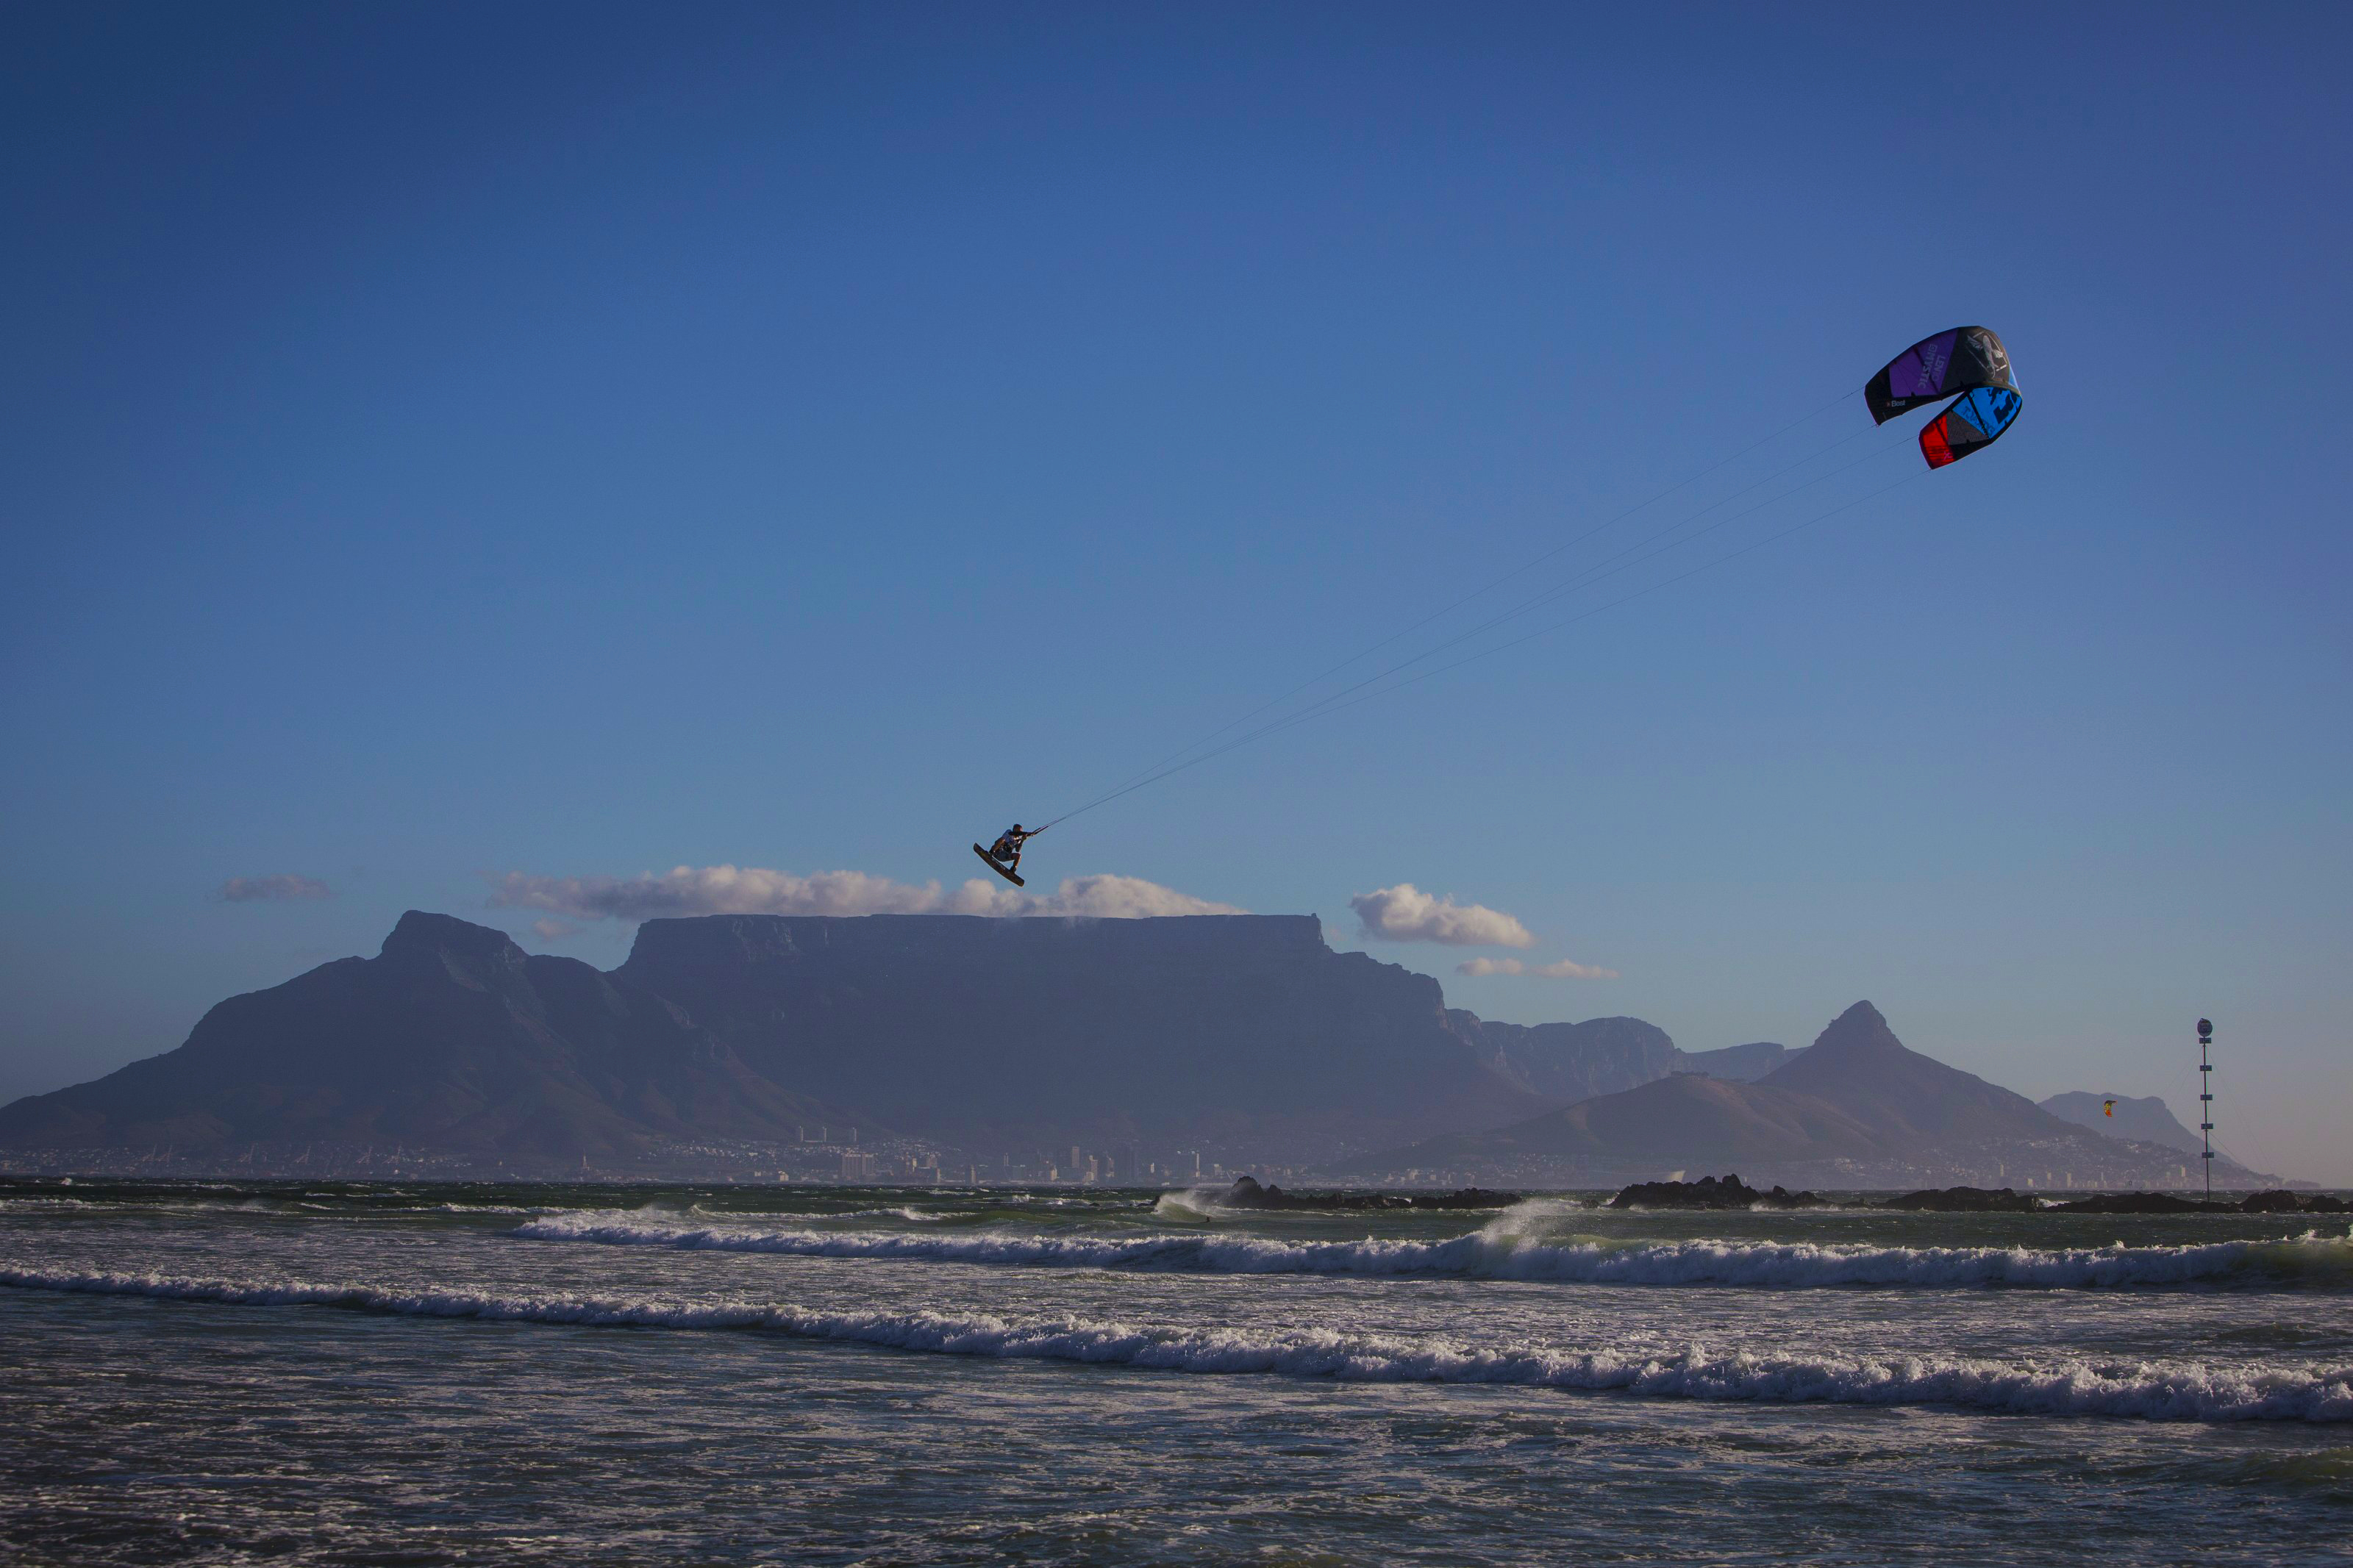 kitesurf wallpaper image - Ruben Lenten megaloop at the Red Bull King of the Air on the Best Extract kite - flying above table mountain    - in resolution: Original 3200 X 2133